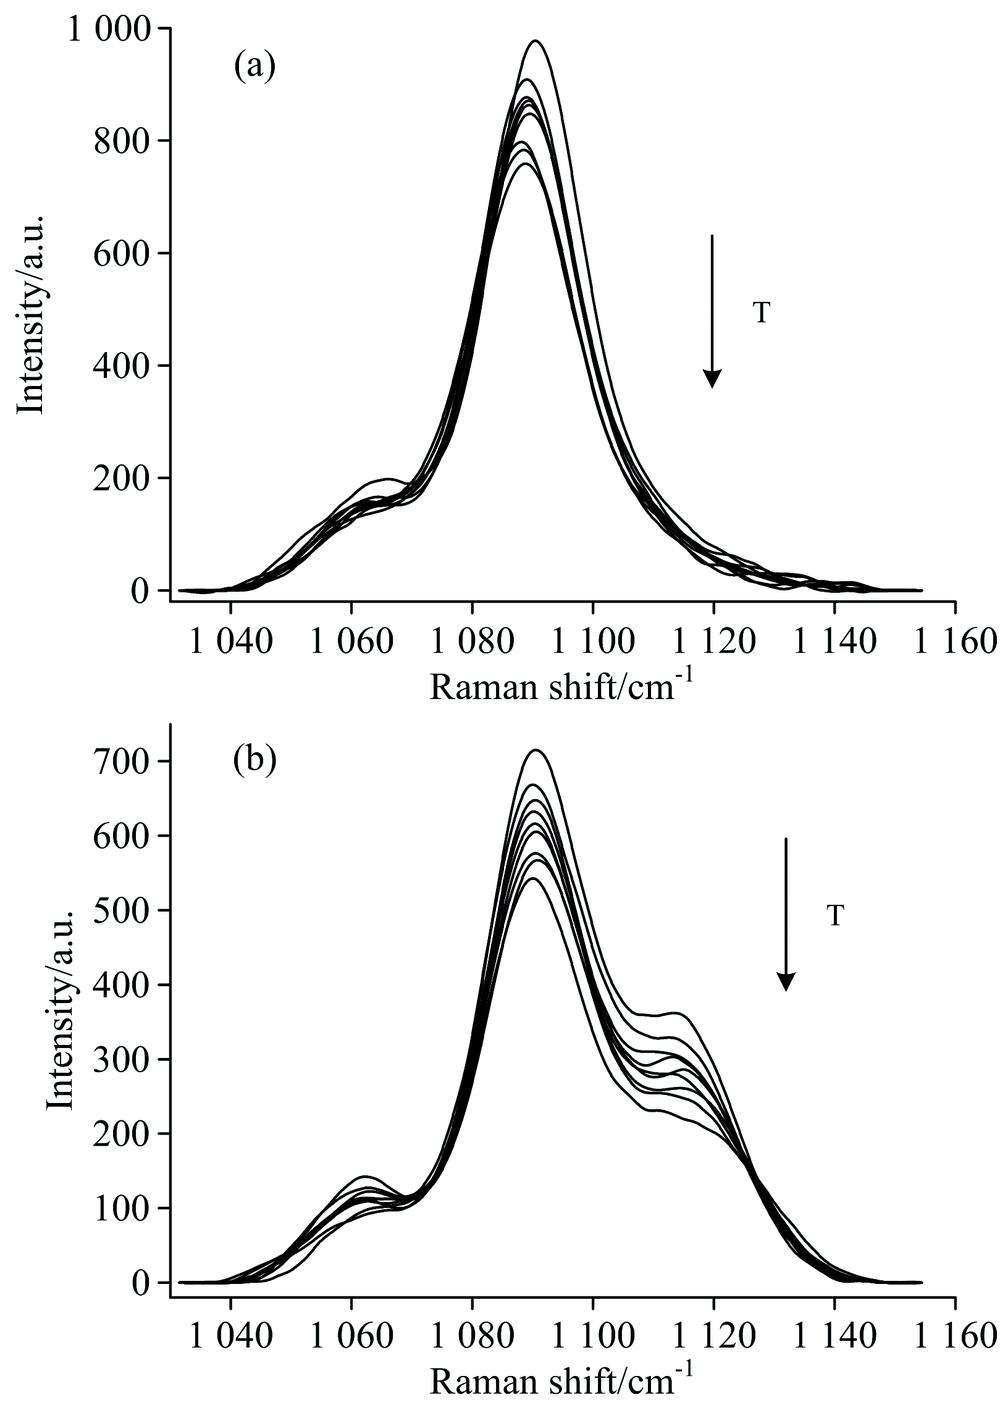 Raman spectra of C—N in pure DMF (a) and 0.84 mol·L-1 CuCl2/DMF (b) at different temperatures